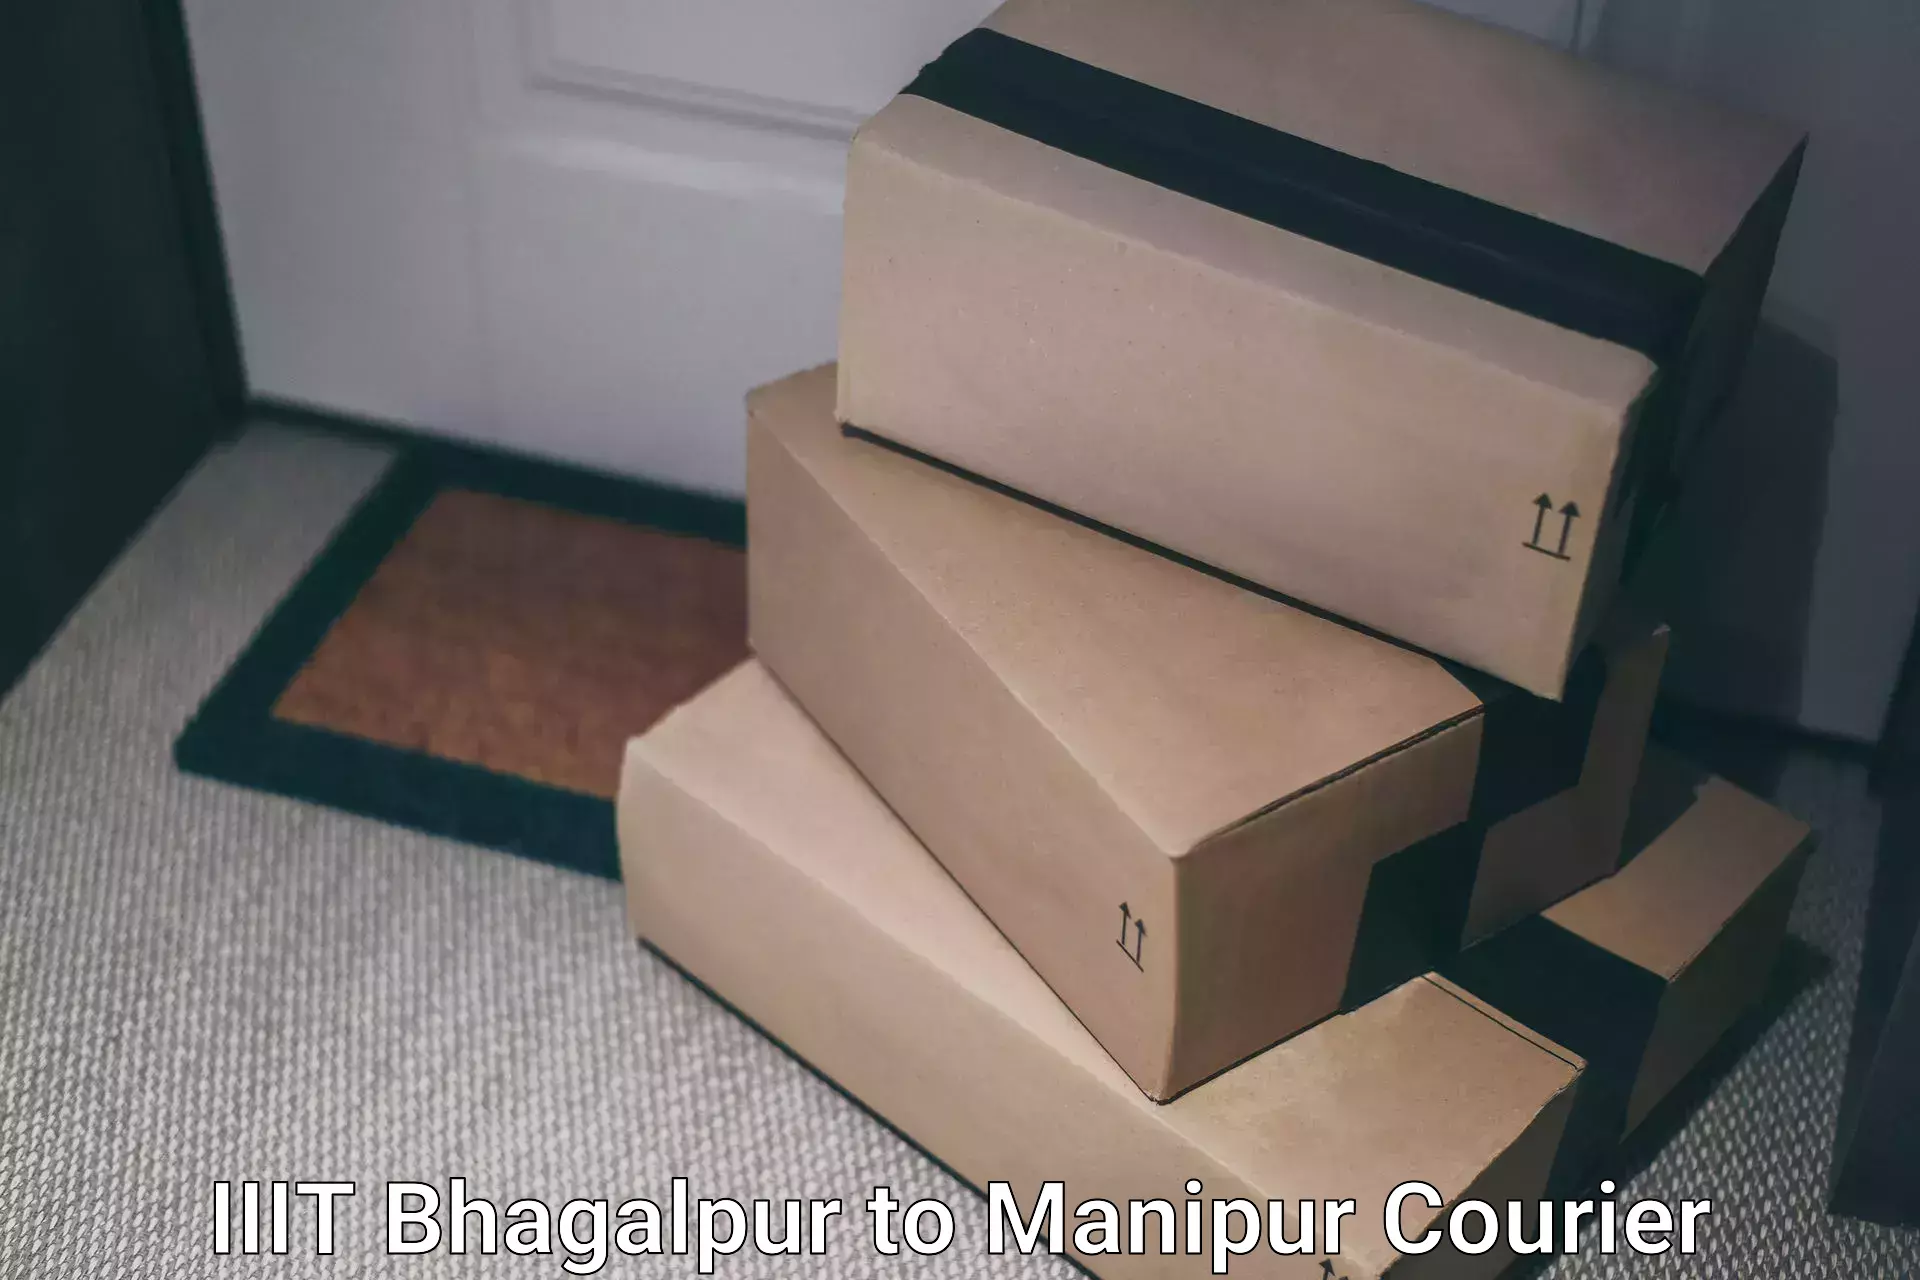 Parcel handling and care in IIIT Bhagalpur to Manipur